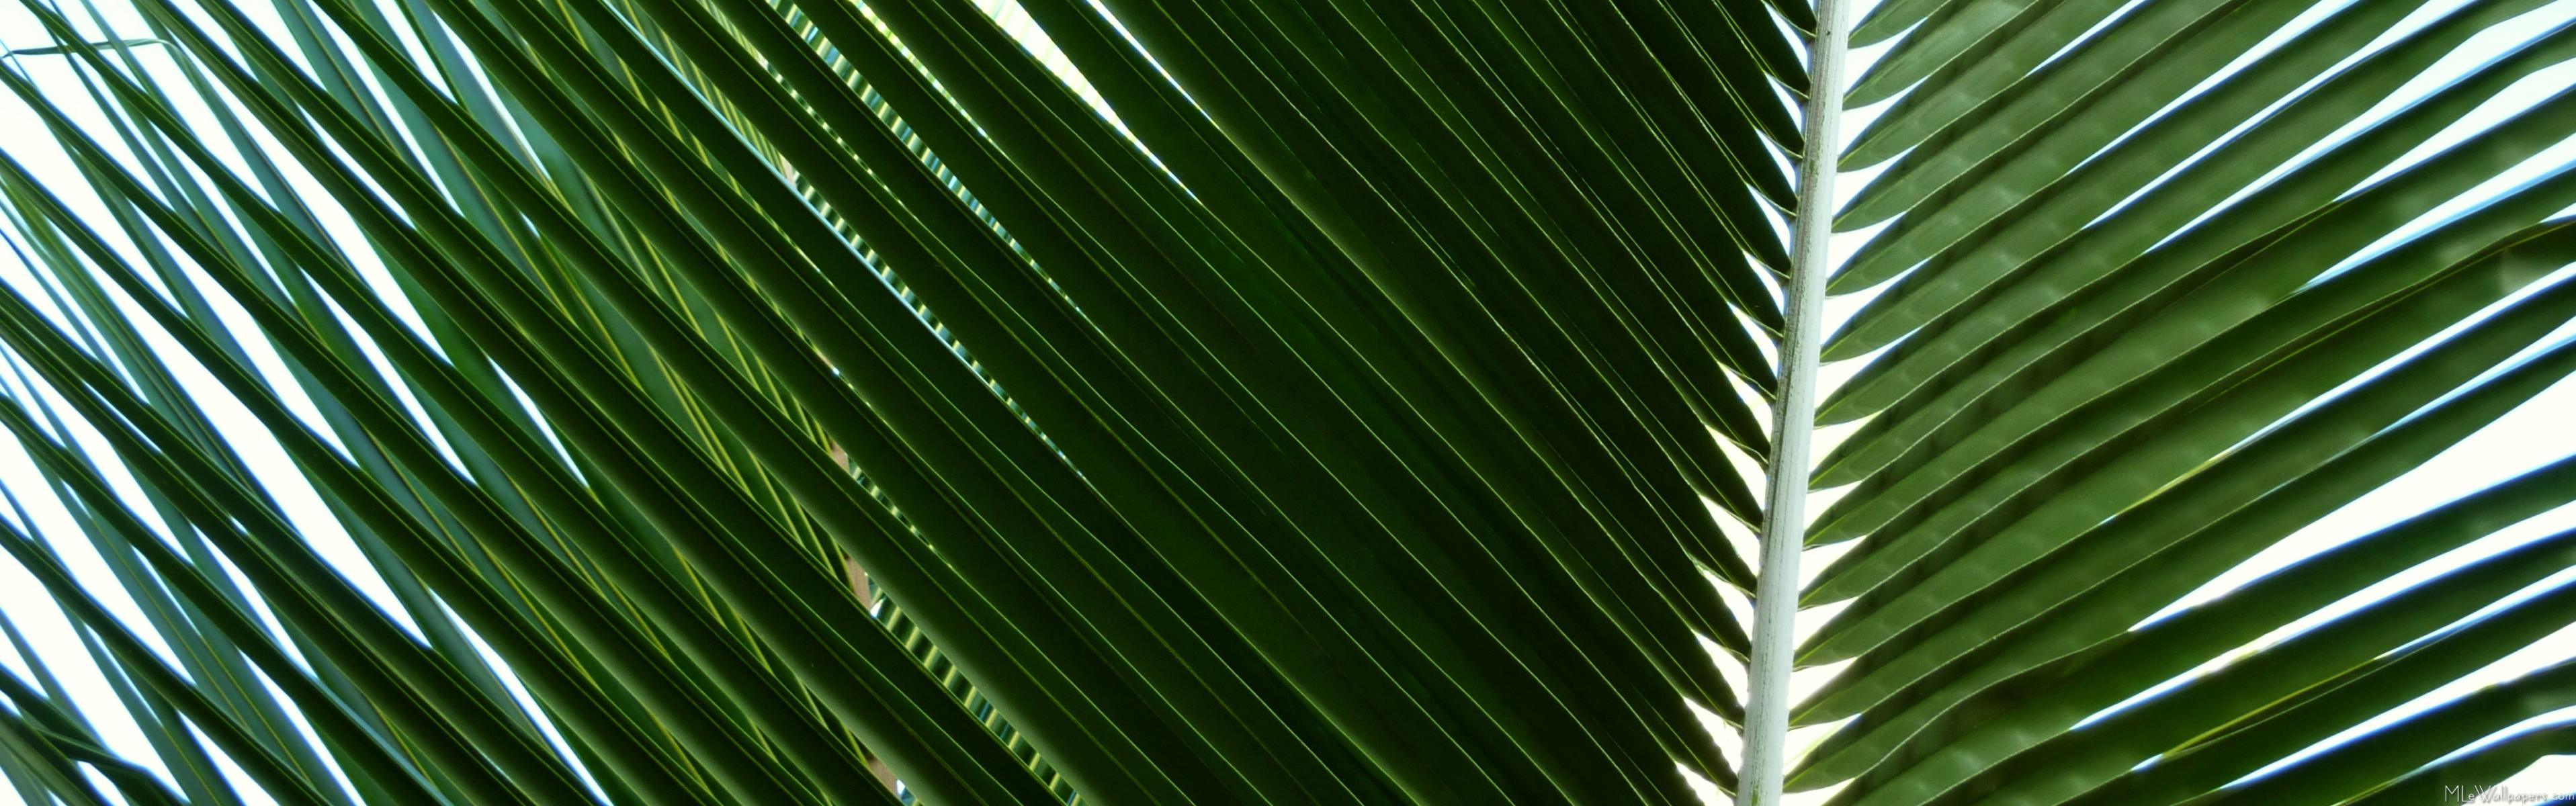 MLeWallpapers.com  Overlapping Palm Fronds